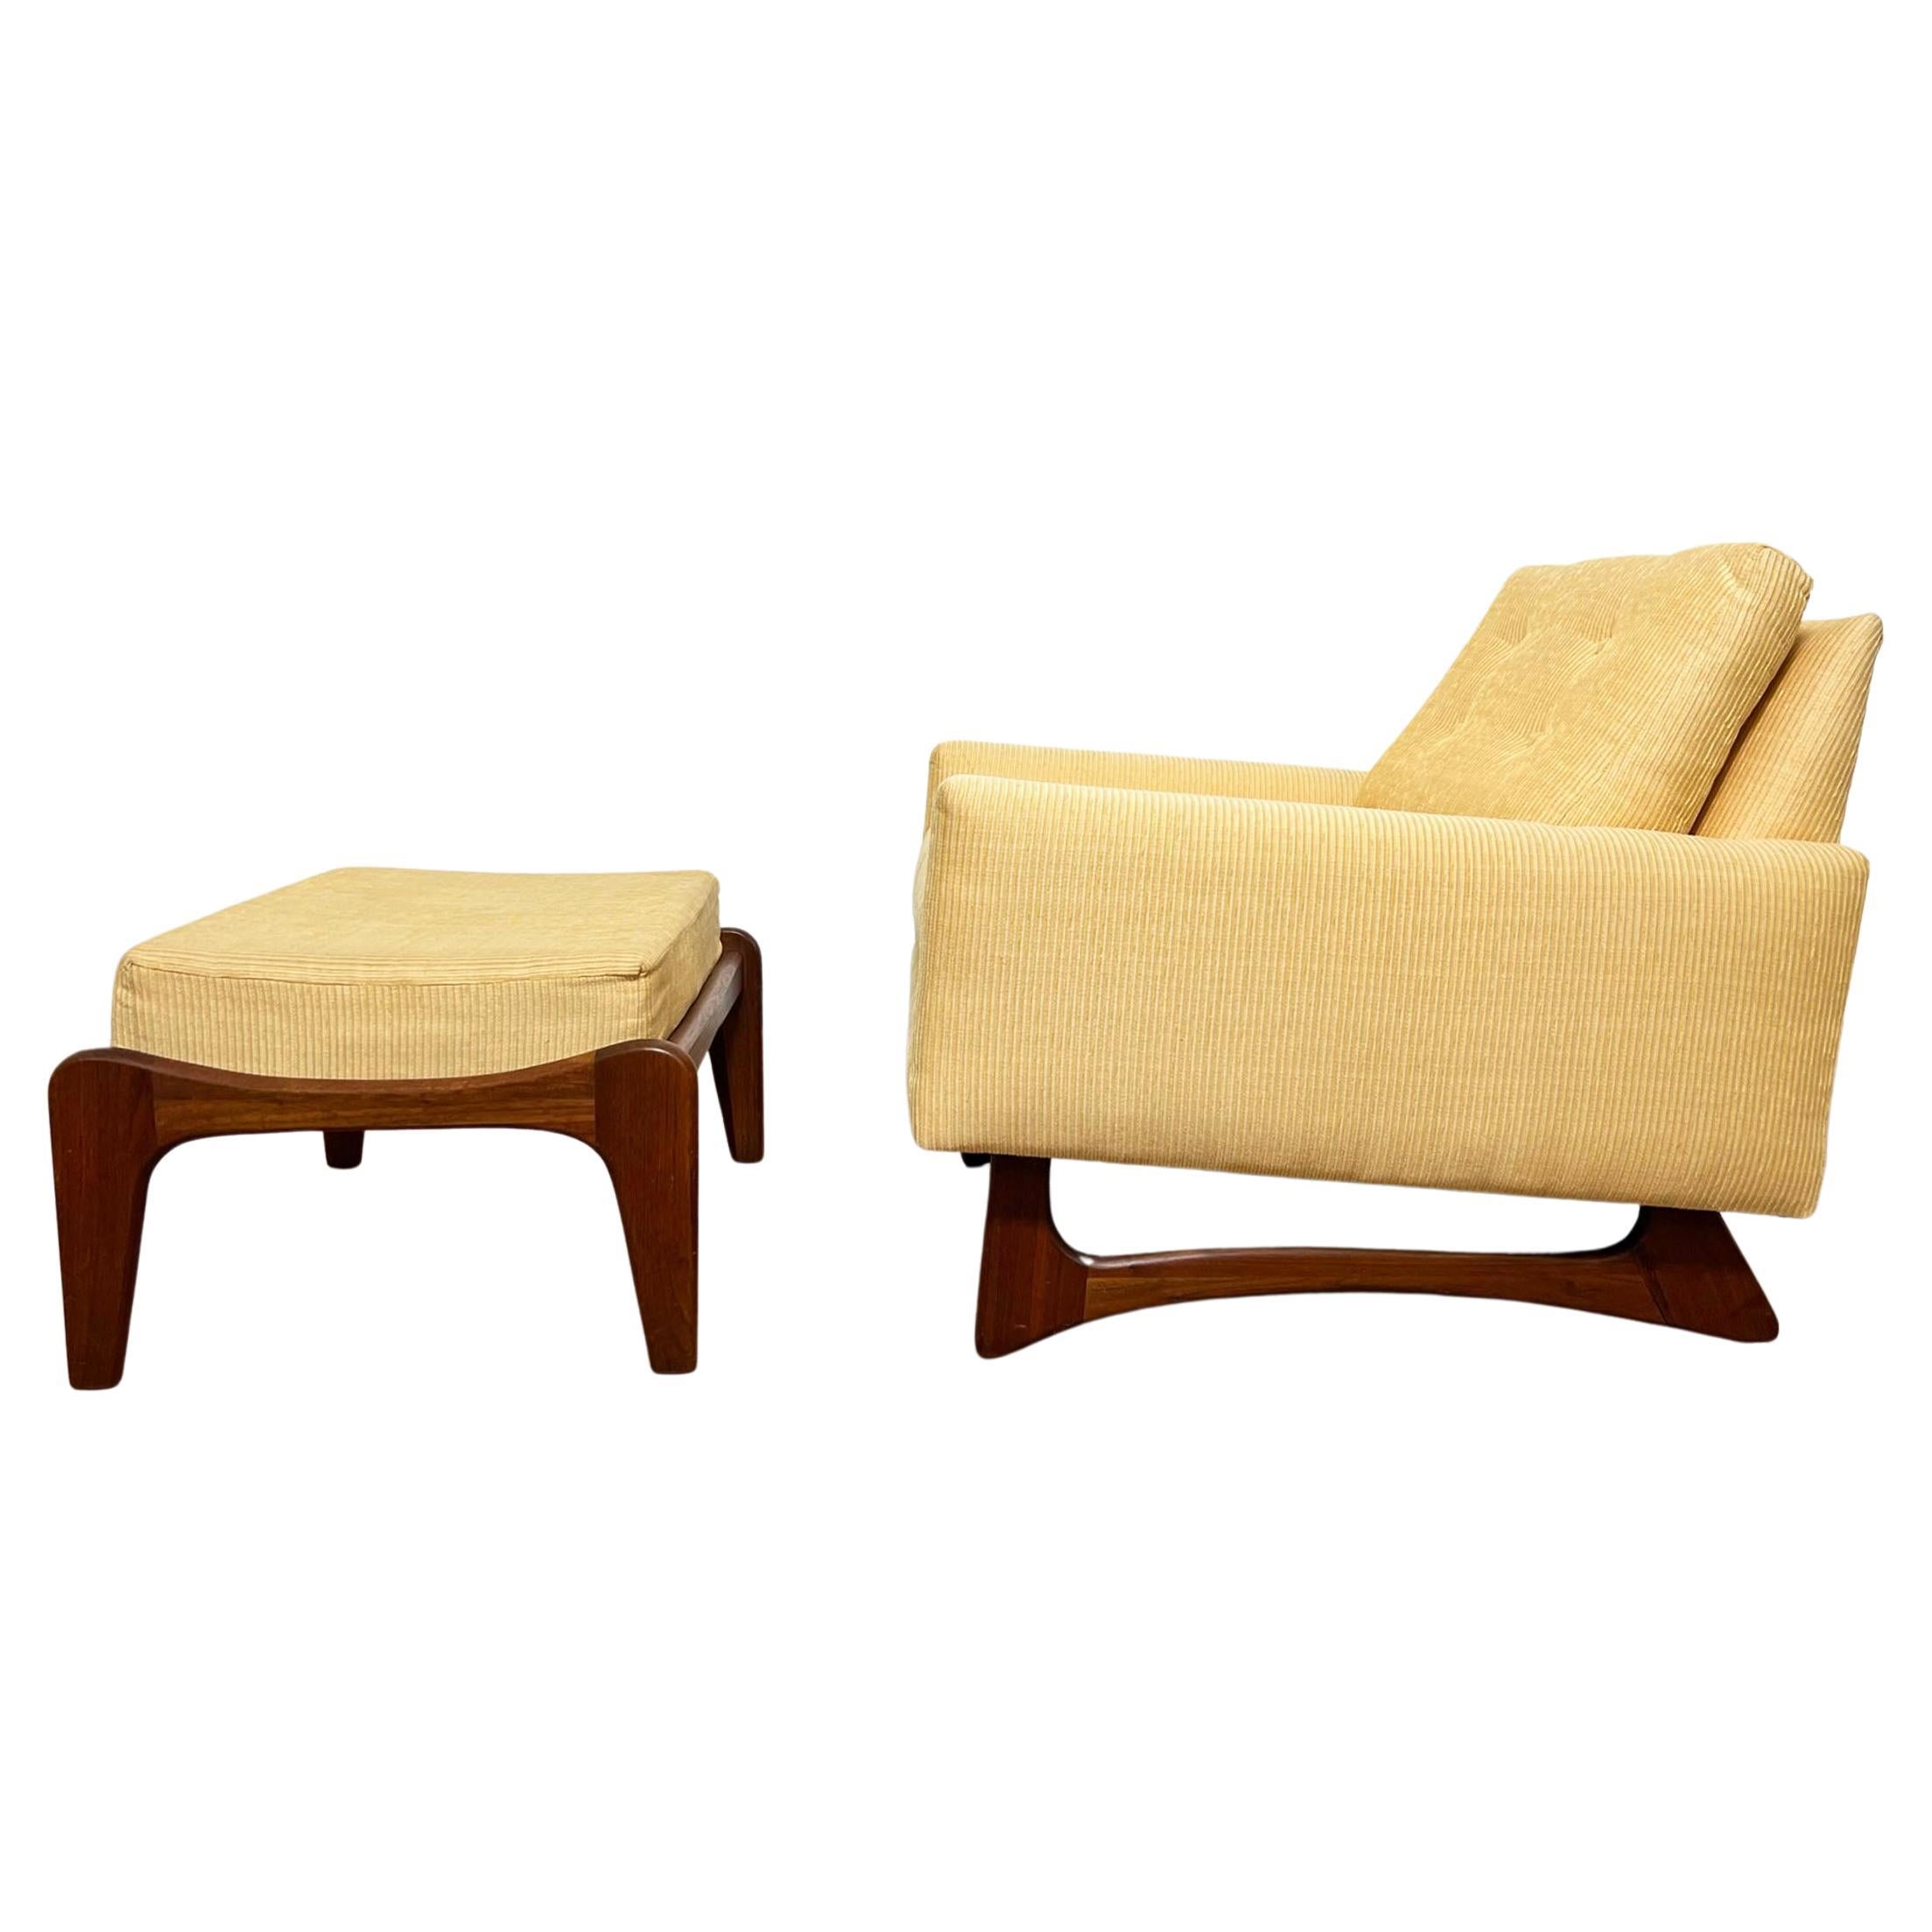 Adrian Pearsall for Craft Associates Lounge Chair and Ottoman, circa 1960s For Sale